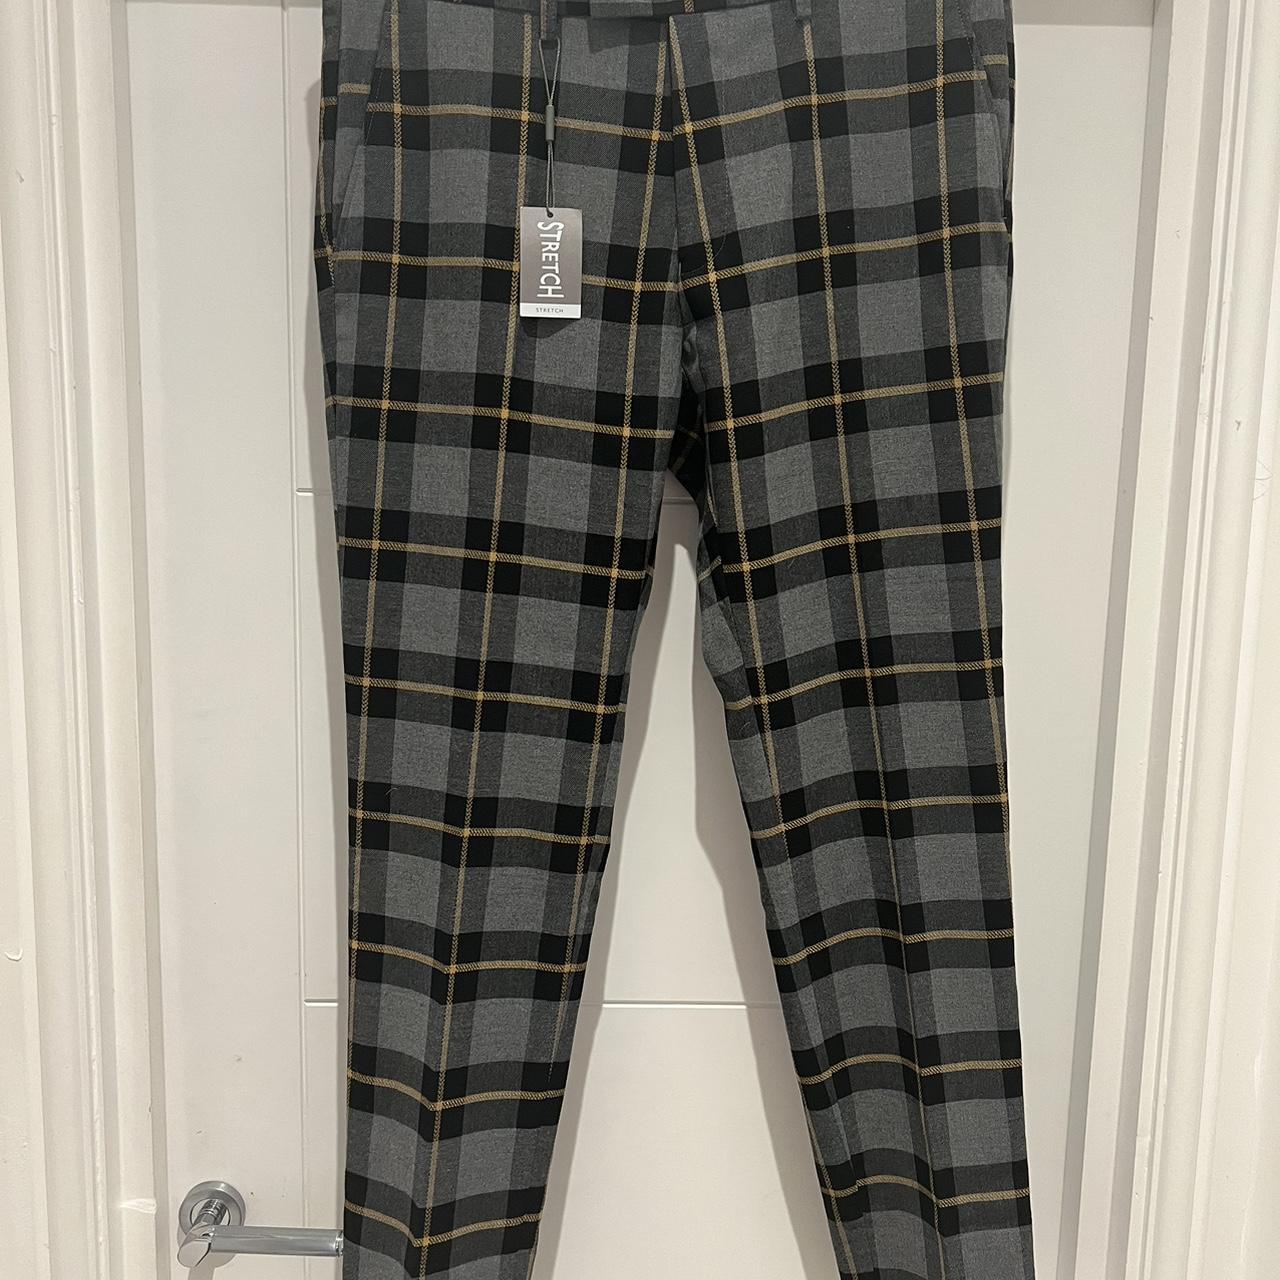 Brand new boss trousers still with tags . - Depop